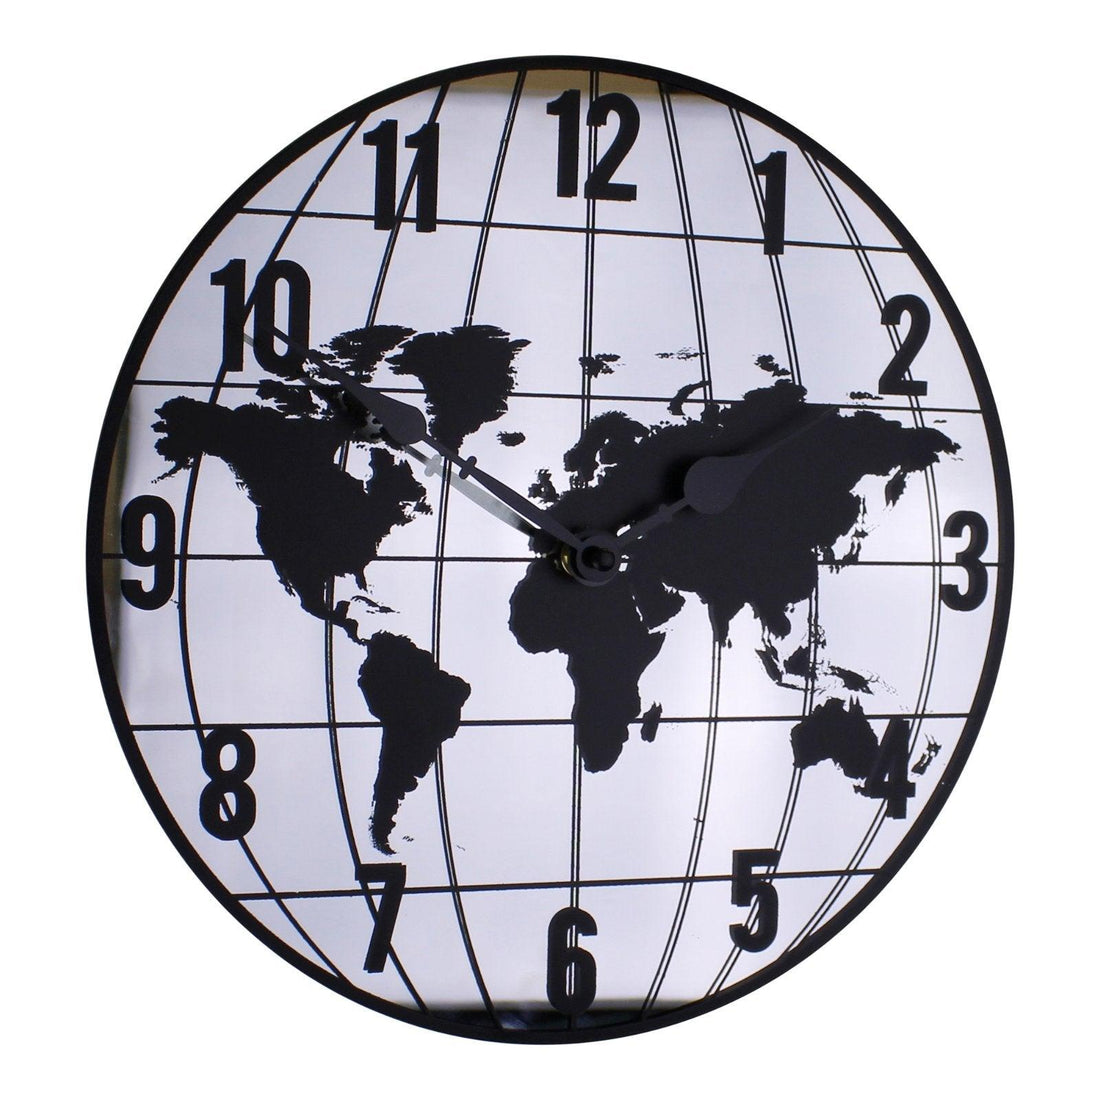 Mirrored Clock Featuring Map Of The World Design 30cm - £41.99 - Wall Hanging Clocks 